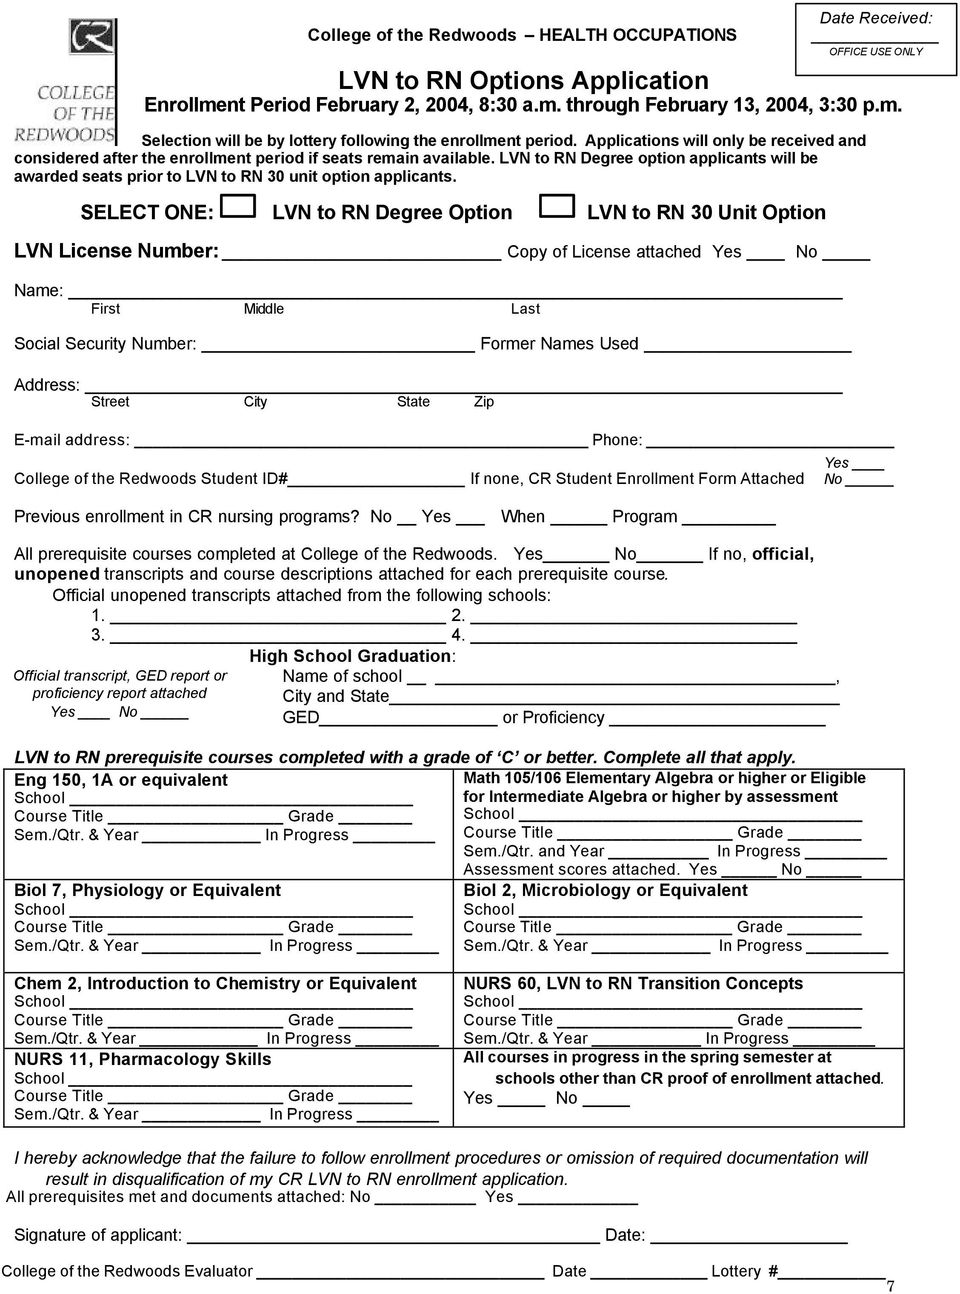 SELECT ONE: LVN to RN Degree Option LVN to RN 30 Unit Option LVN License Number: Copy of License attached Yes No Name: First Middle Last Social Security Number: Former Names Used Address: Street City